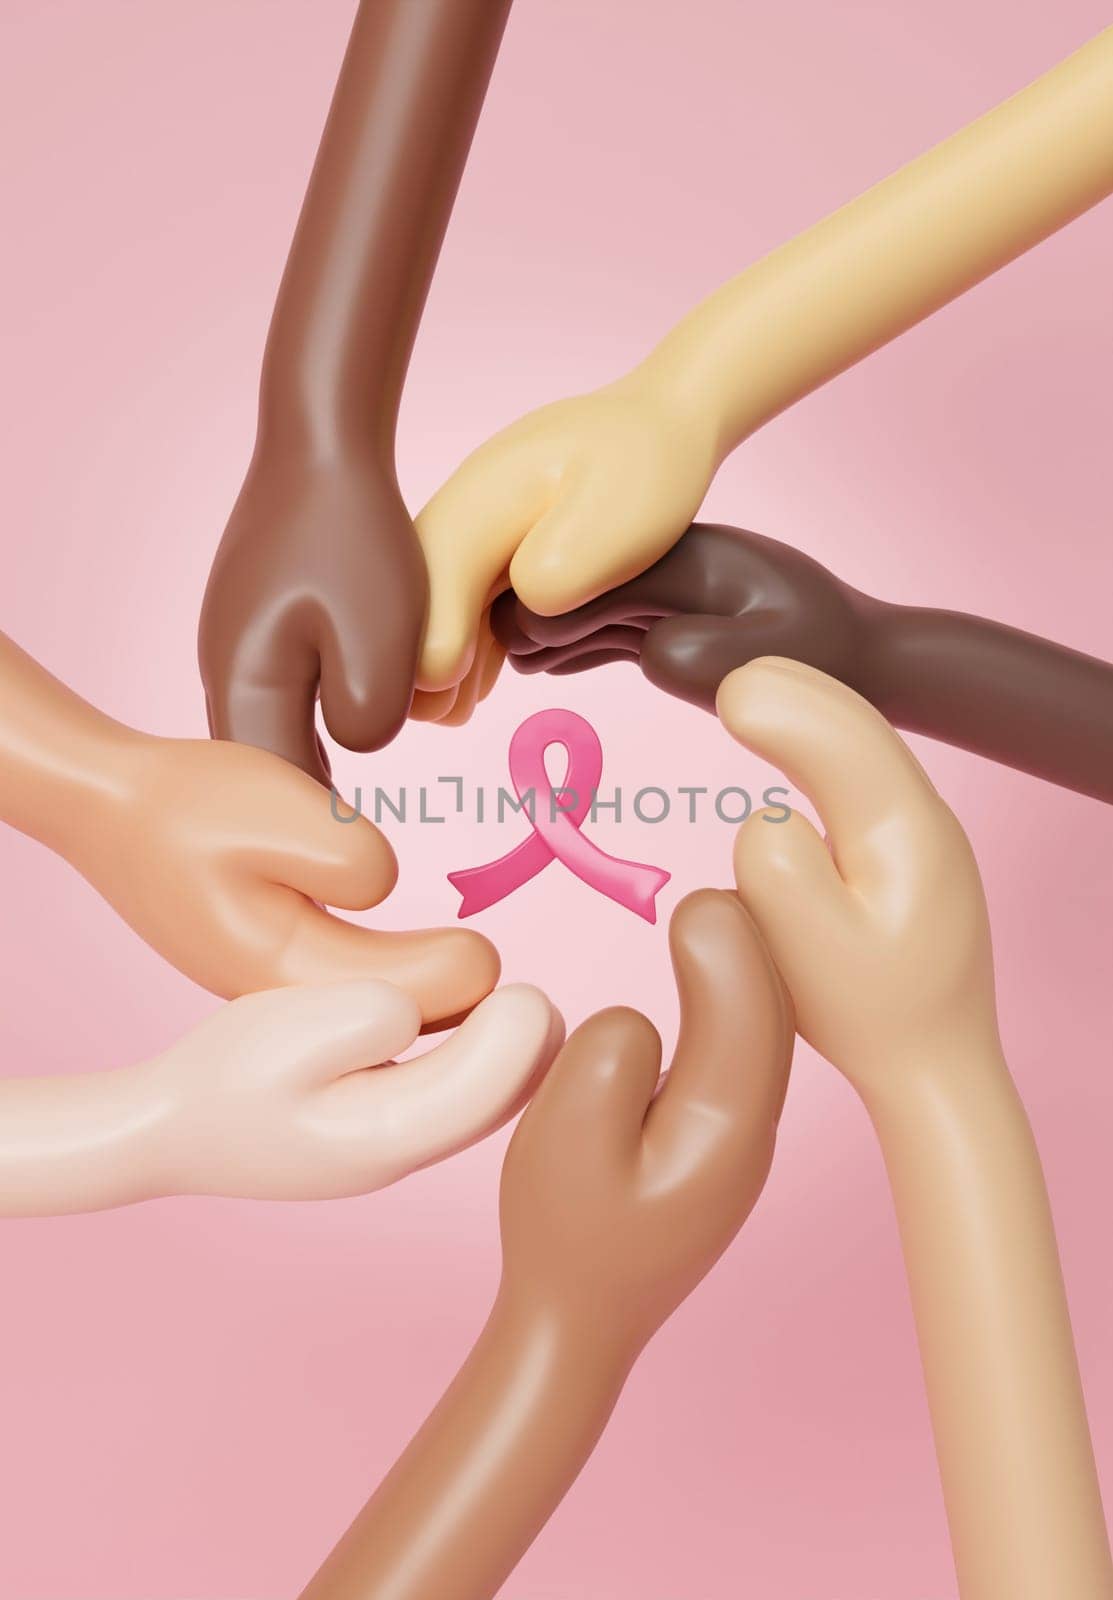 Group of diverse hands holding pink ribbon together representing breast cancer awareness and support. 3D render illustration..